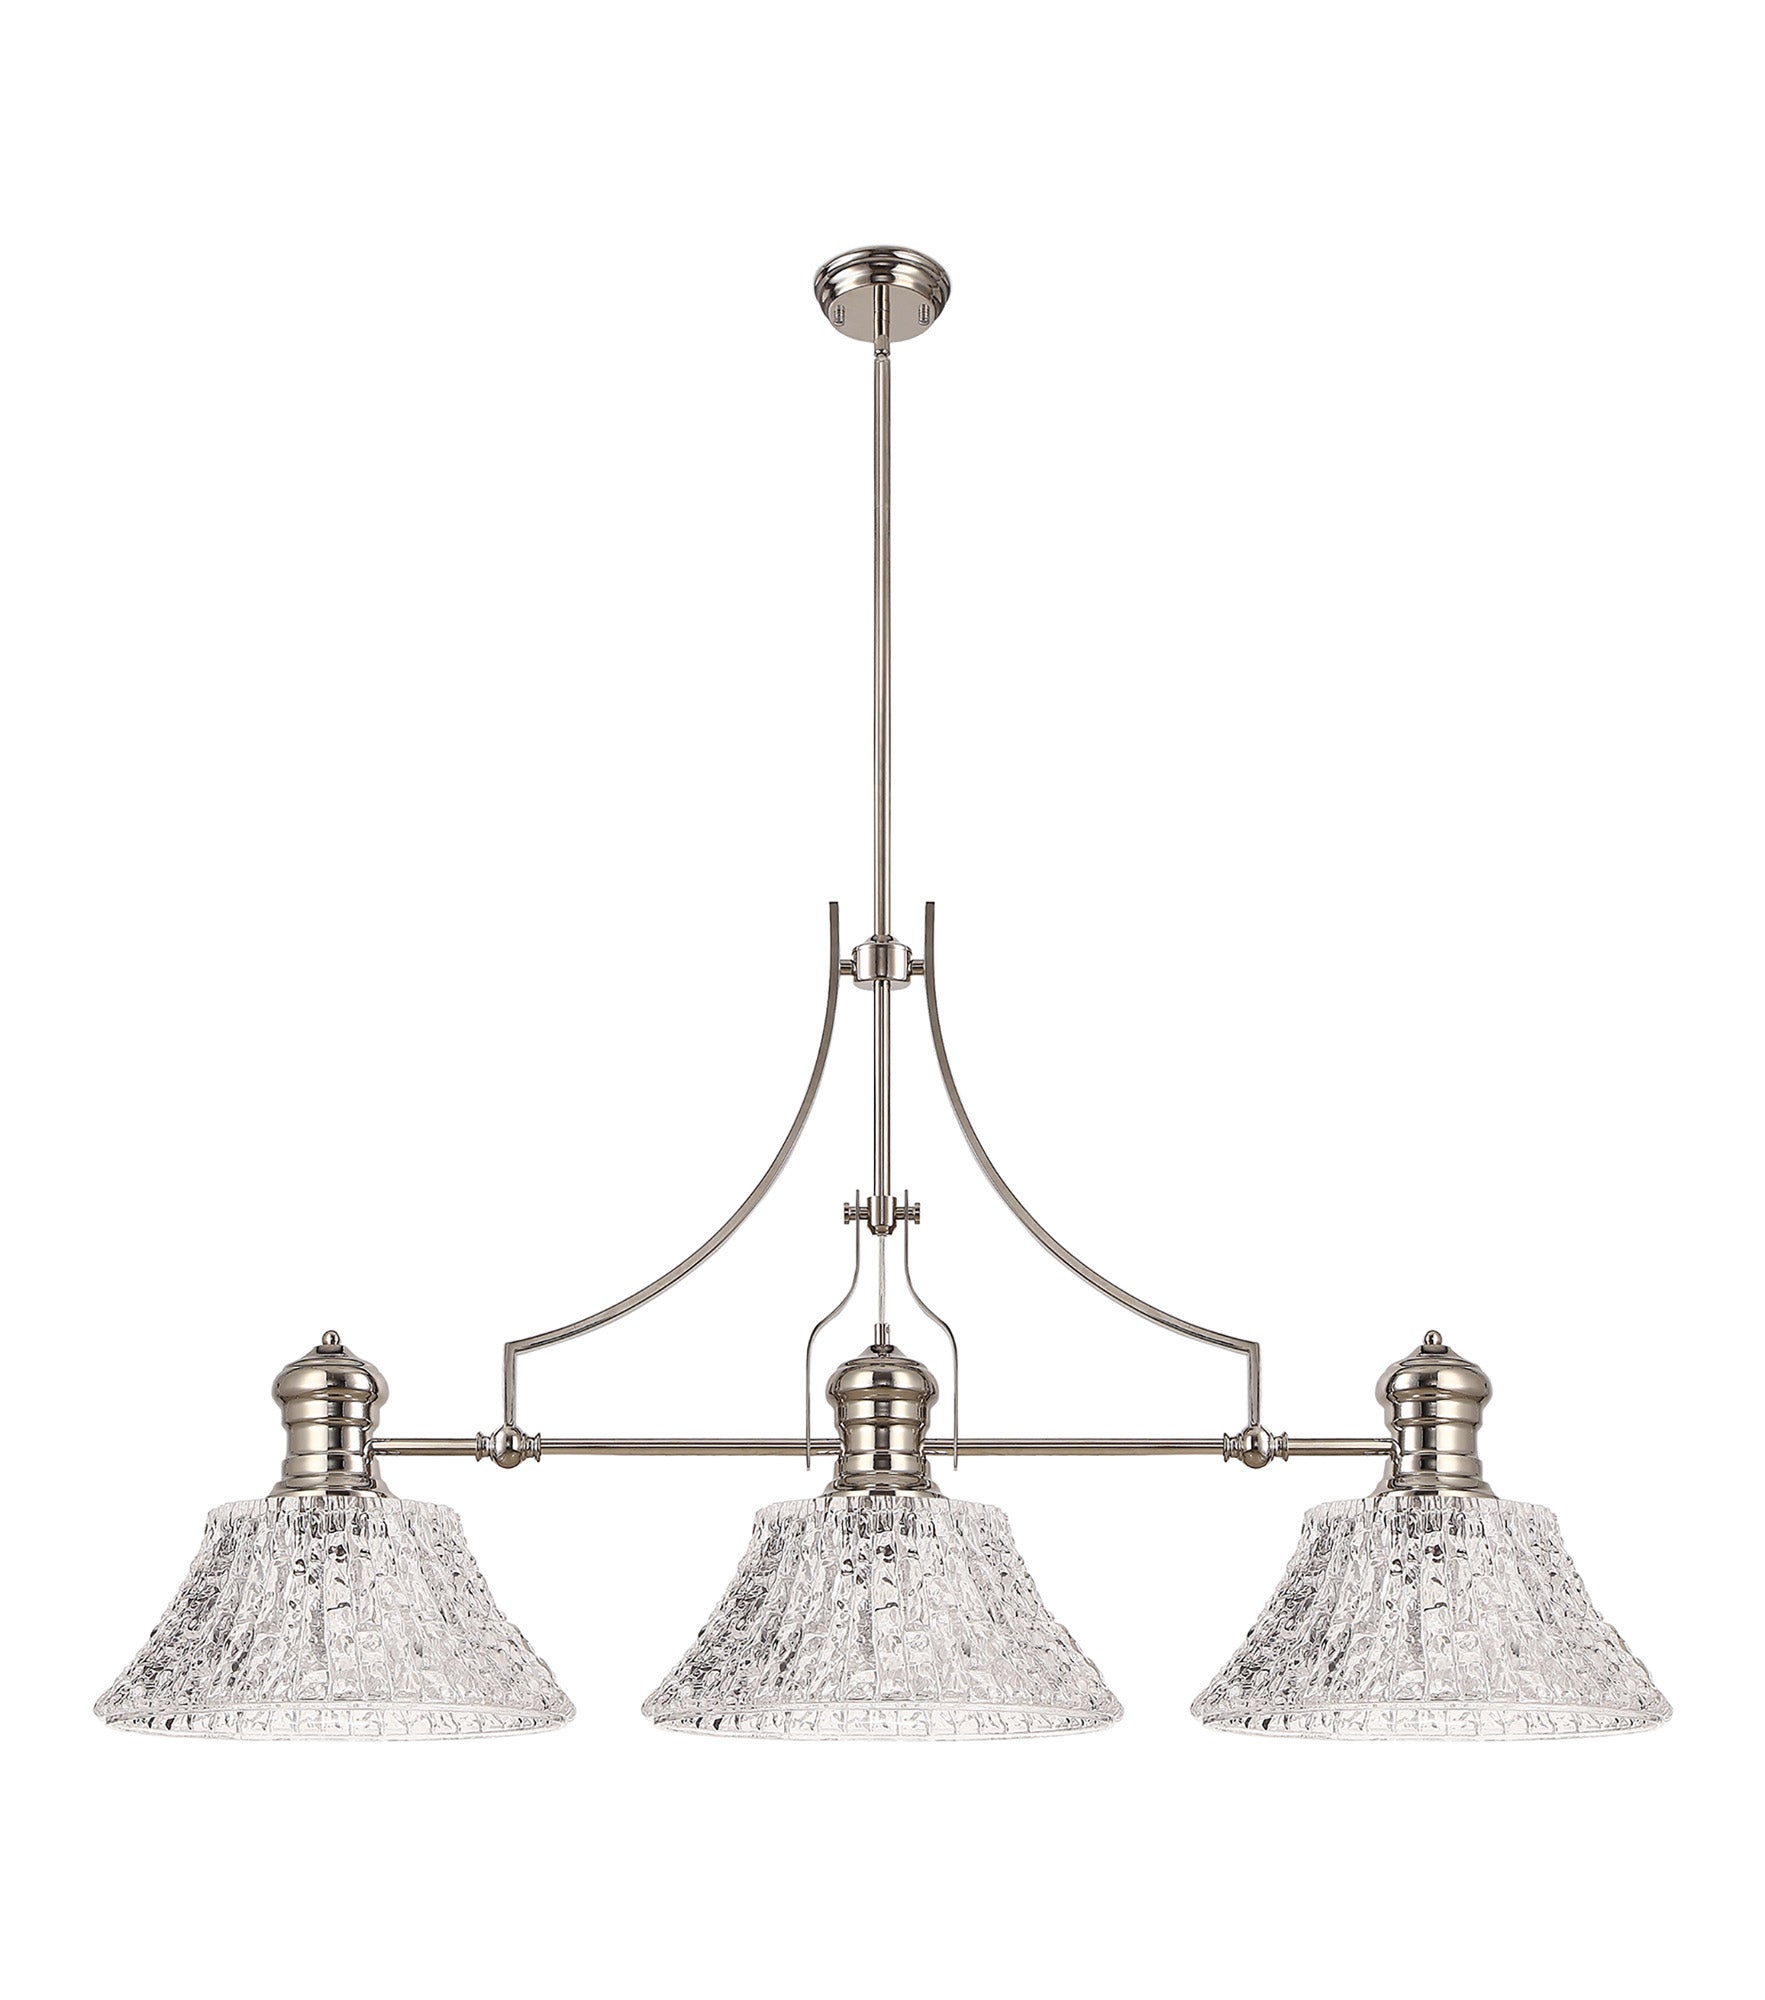 Docker Linear Pendant With 38cm Patterned Round Shade, 3 x E27, Polished Nickel/Clear Glass Item Weight: 19.1kg LOK104823